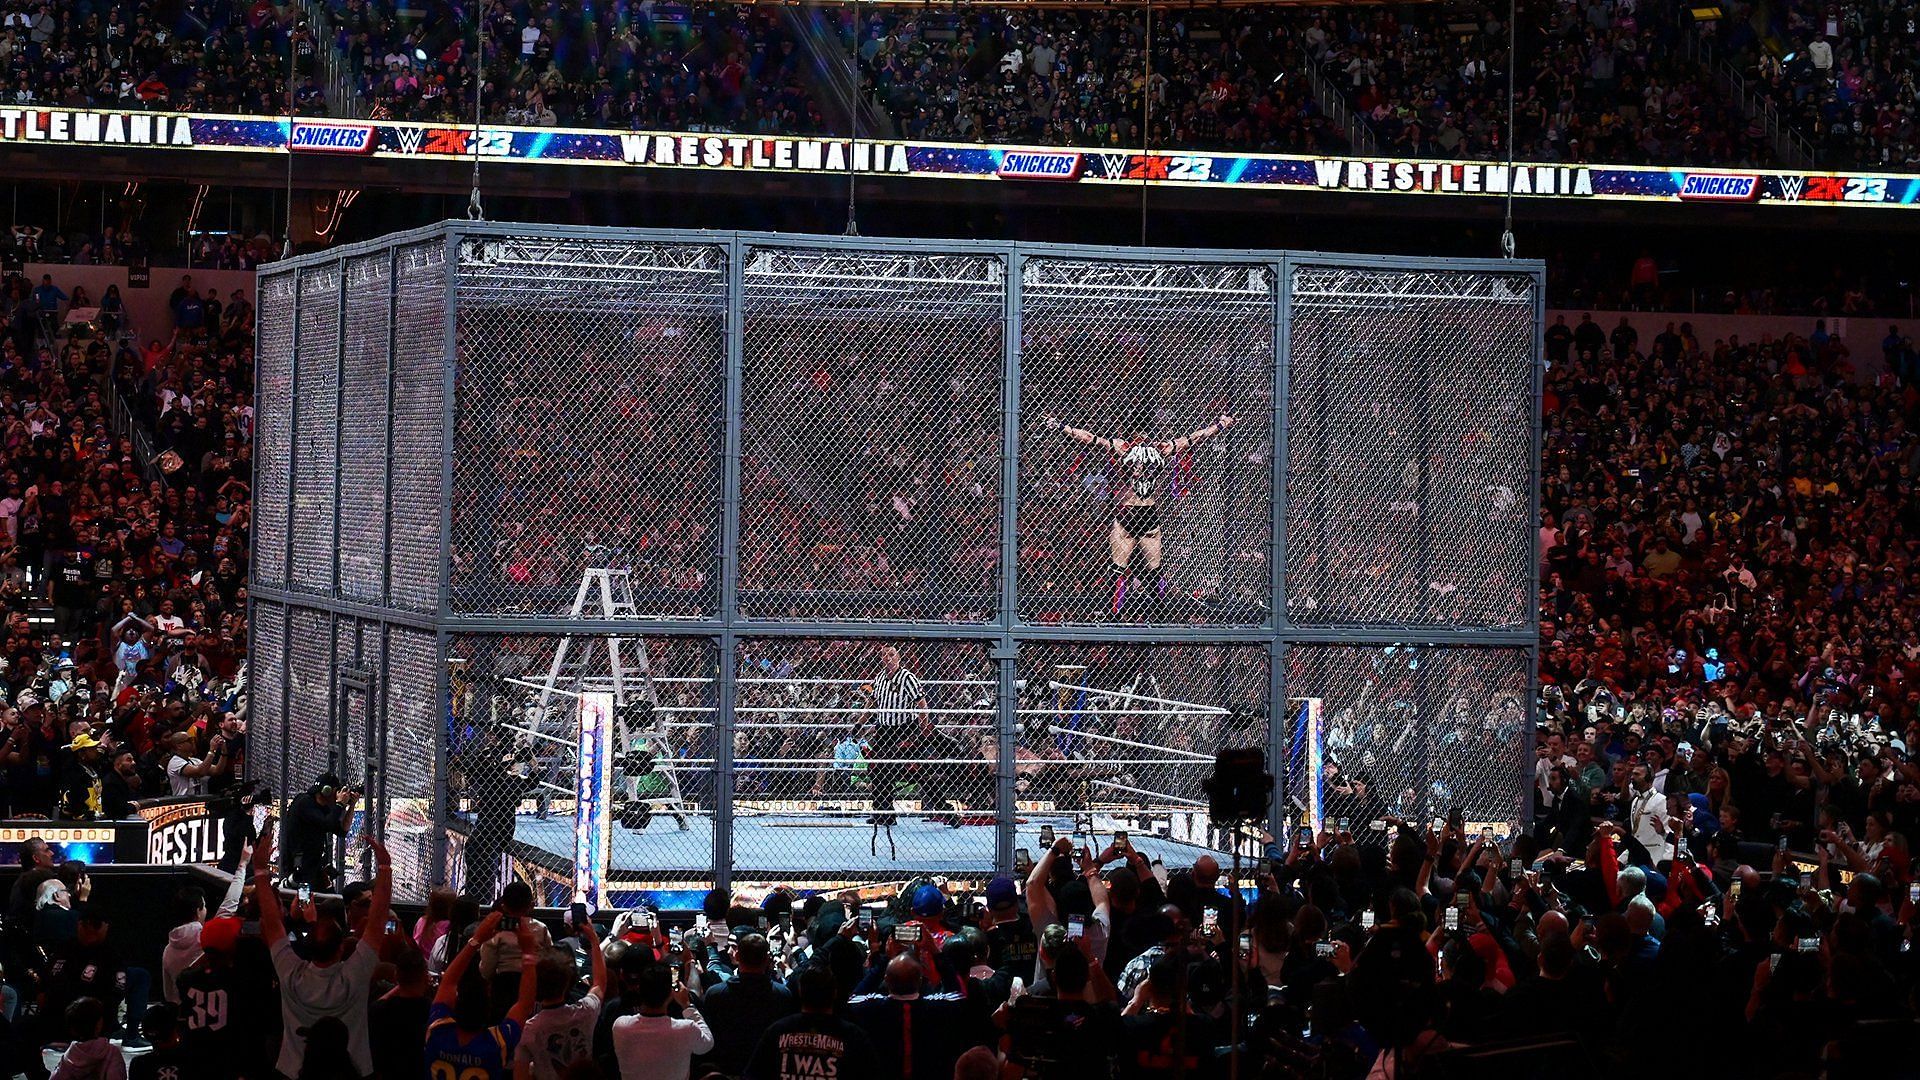 The Hell in a Cell